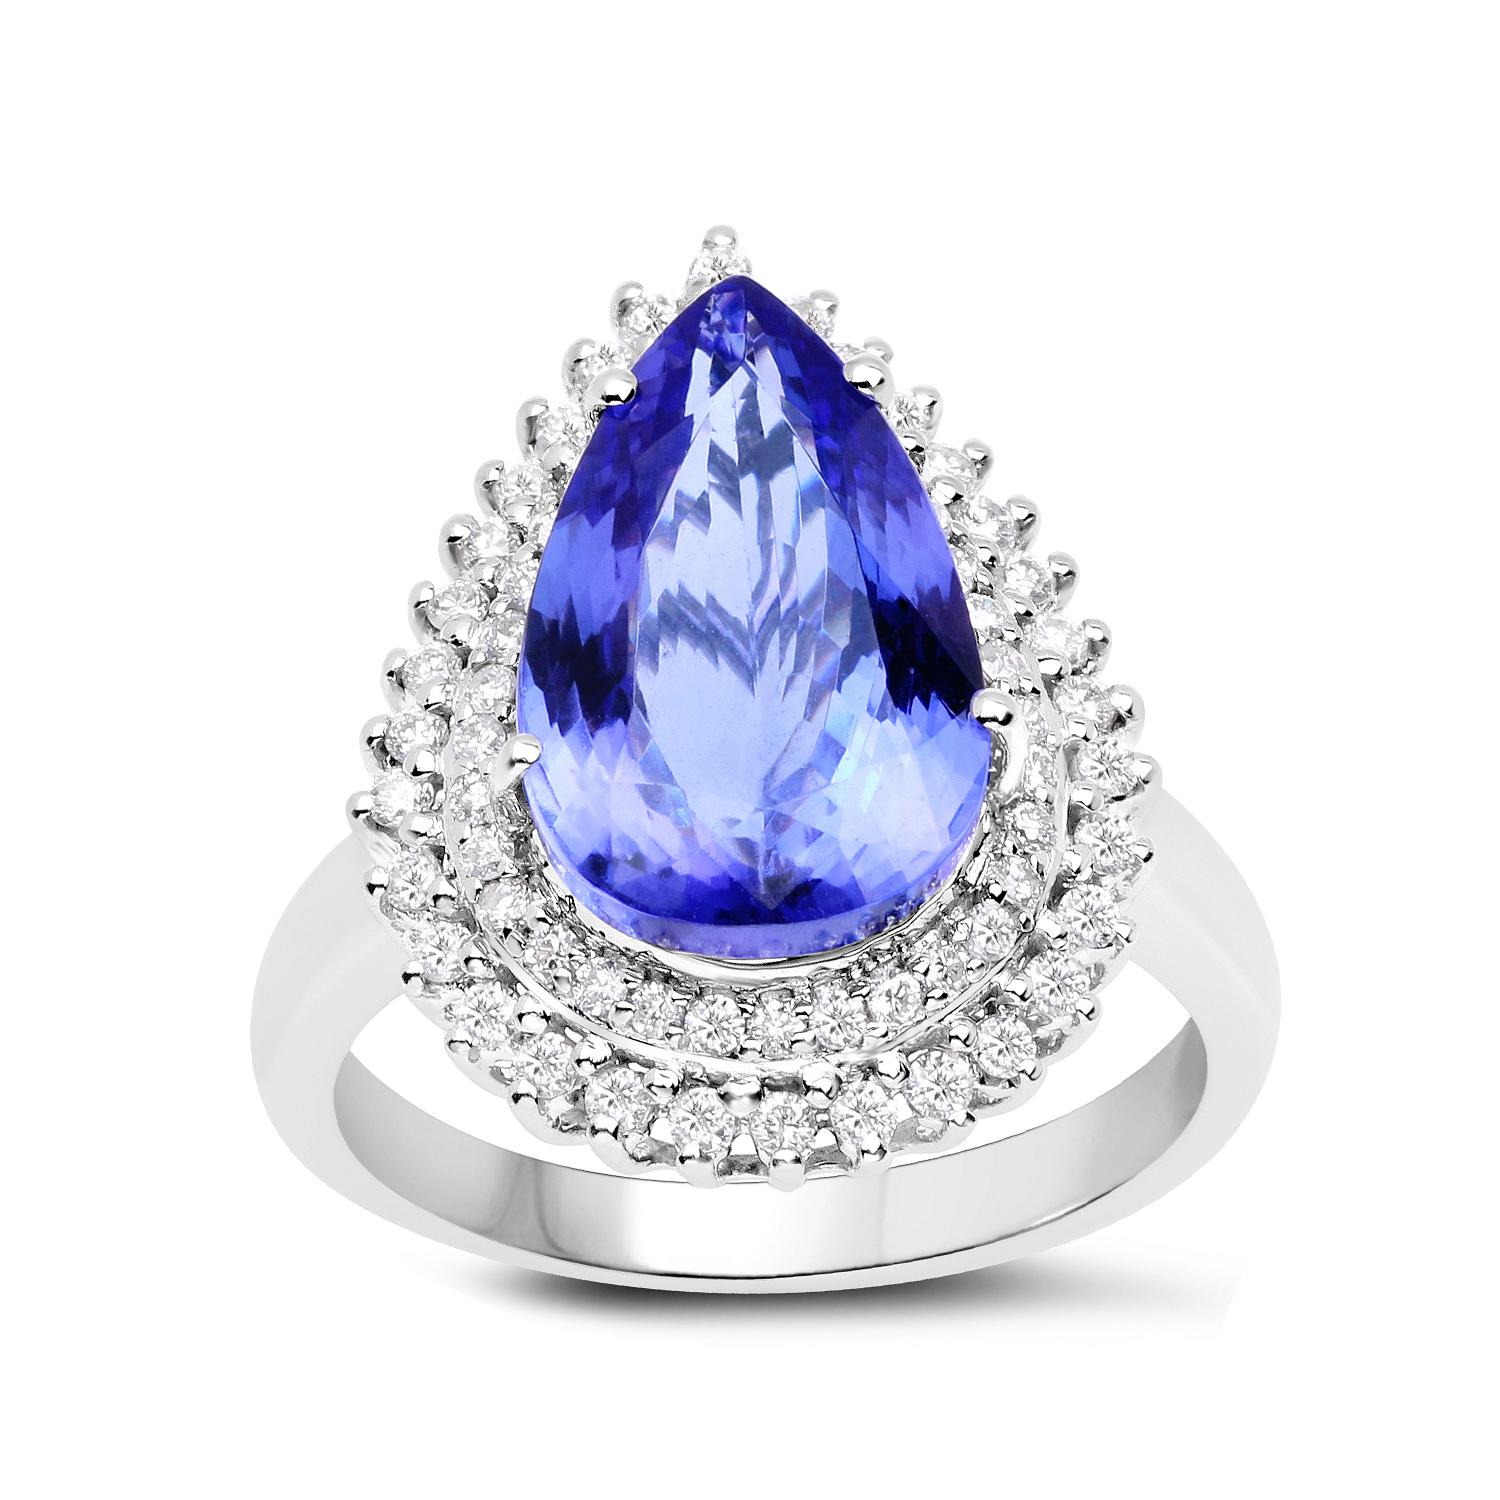 6.12 Carat Genuine Tanzanite and White Diamond 14 Karat White Gold Ring In New Condition For Sale In Great Neck, NY